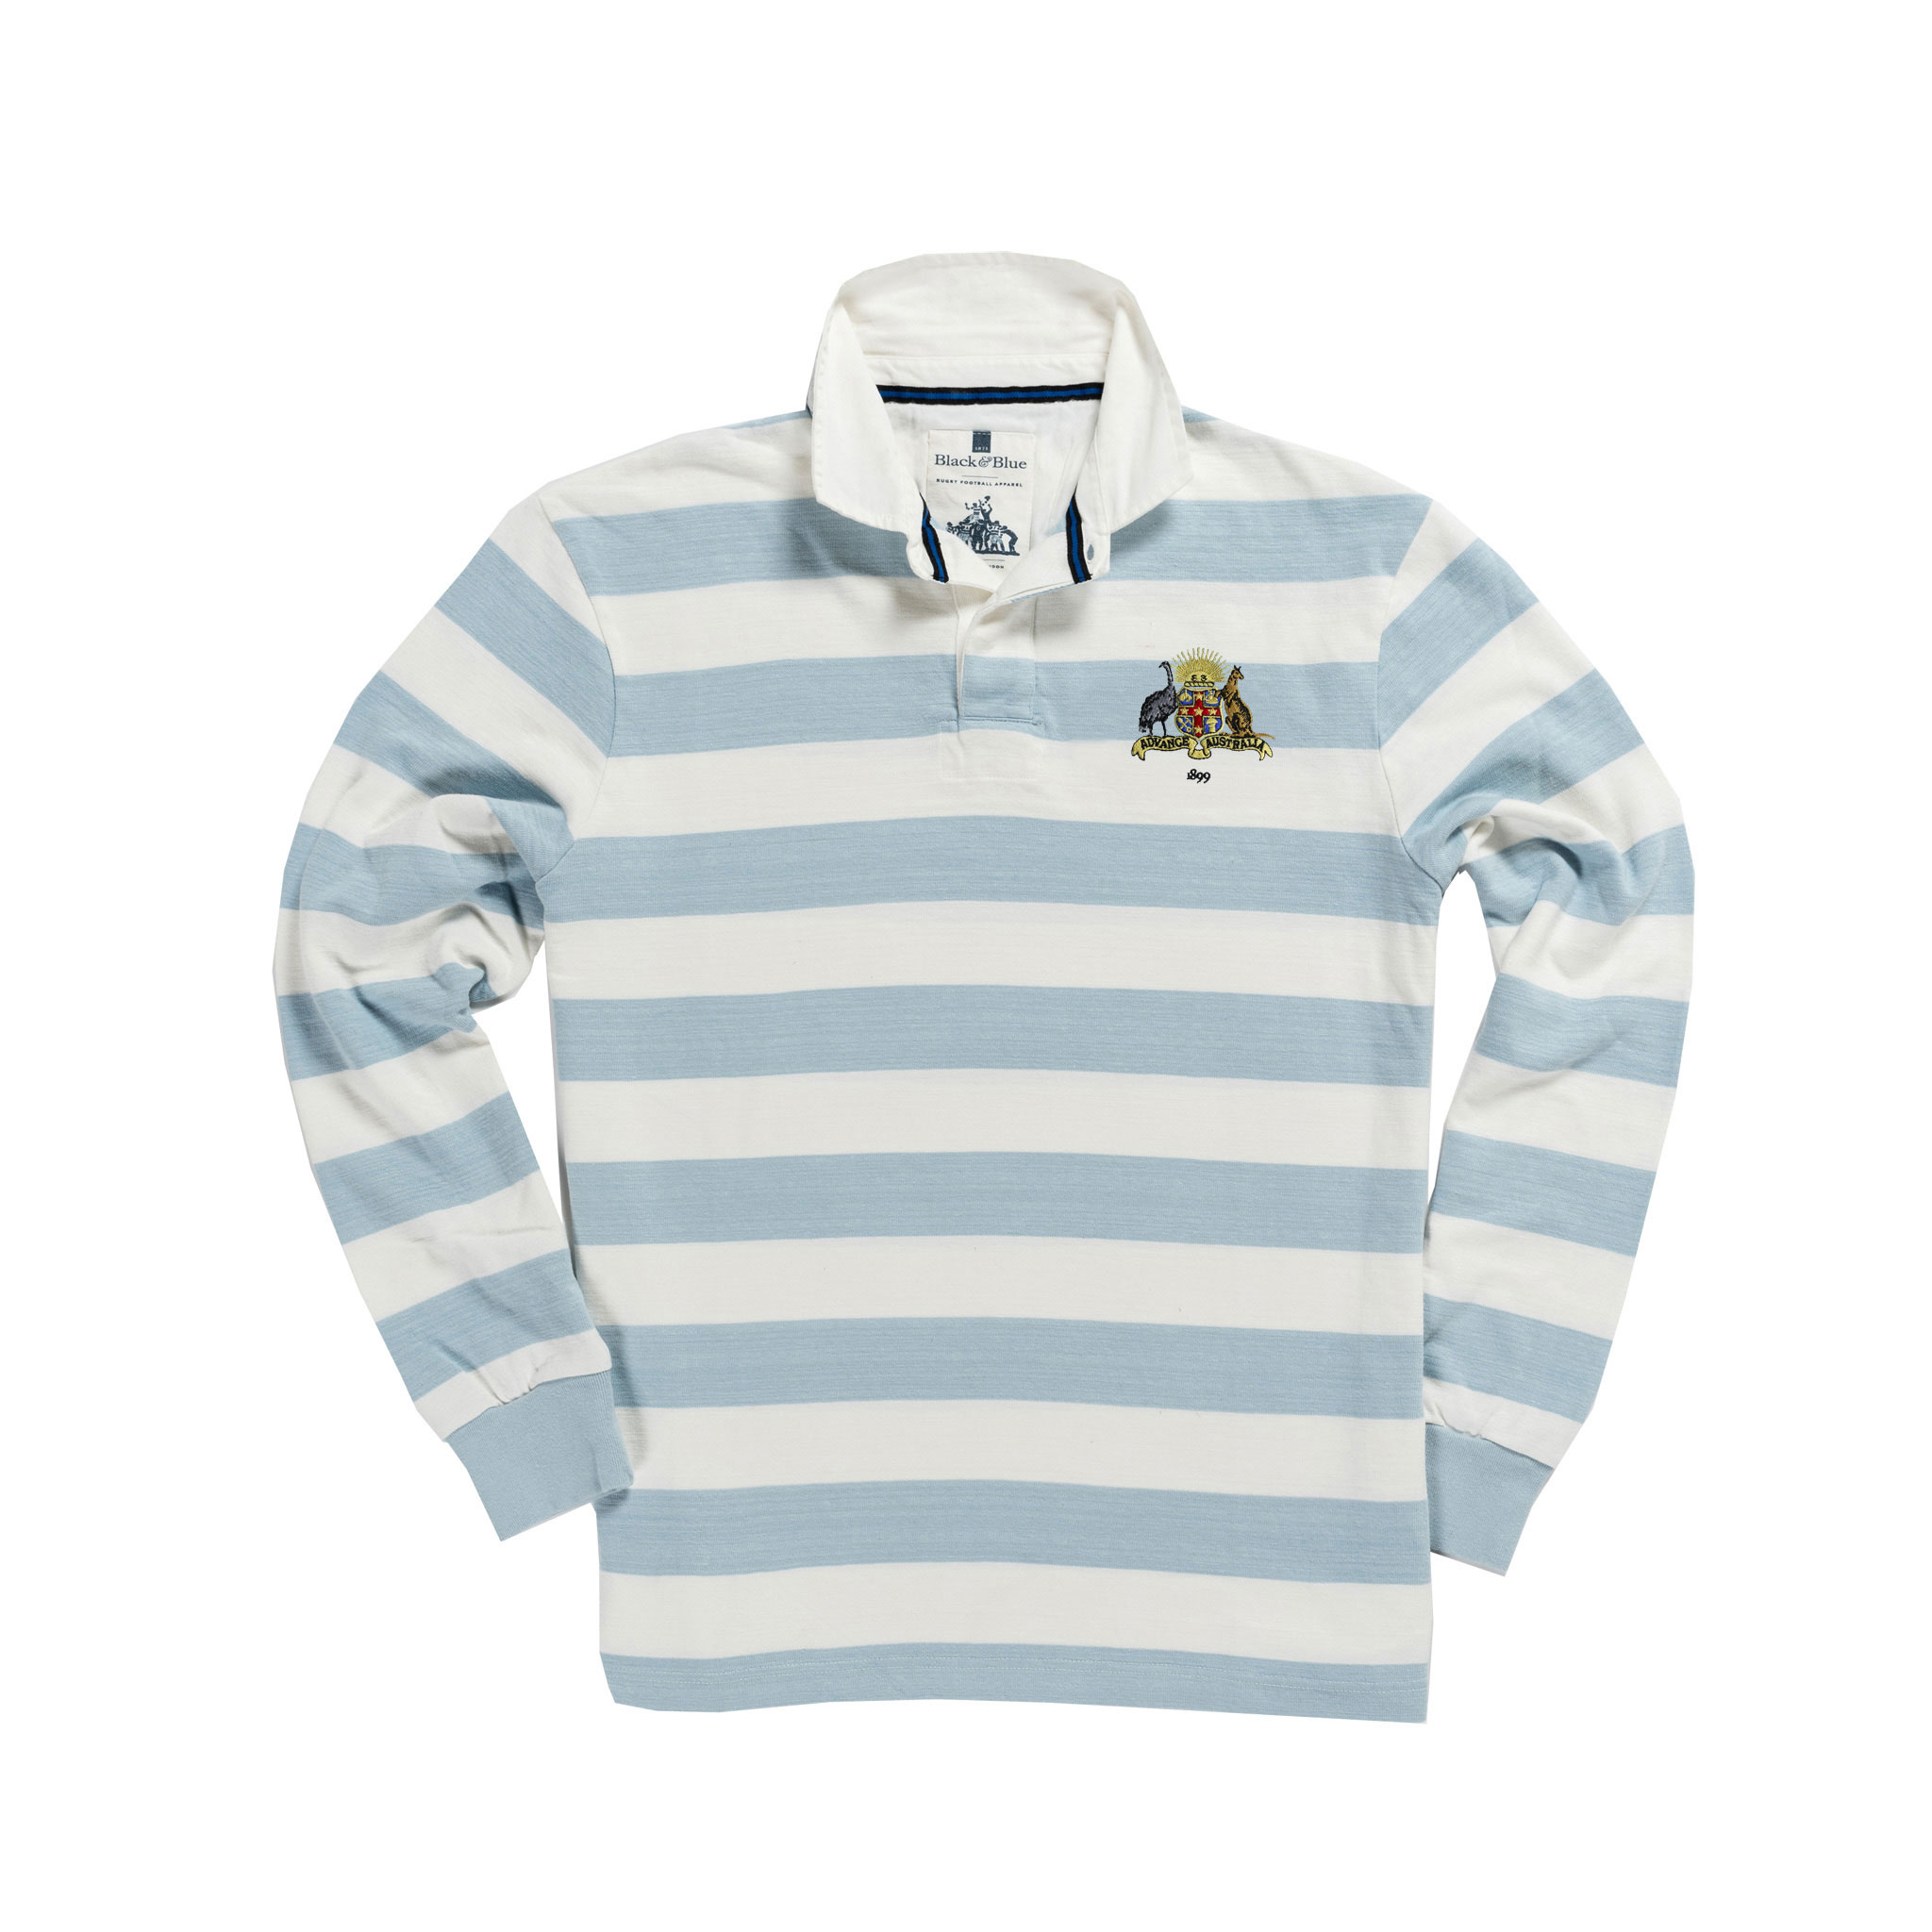 Australia 1899 Crest_Sky Blue and White_Front